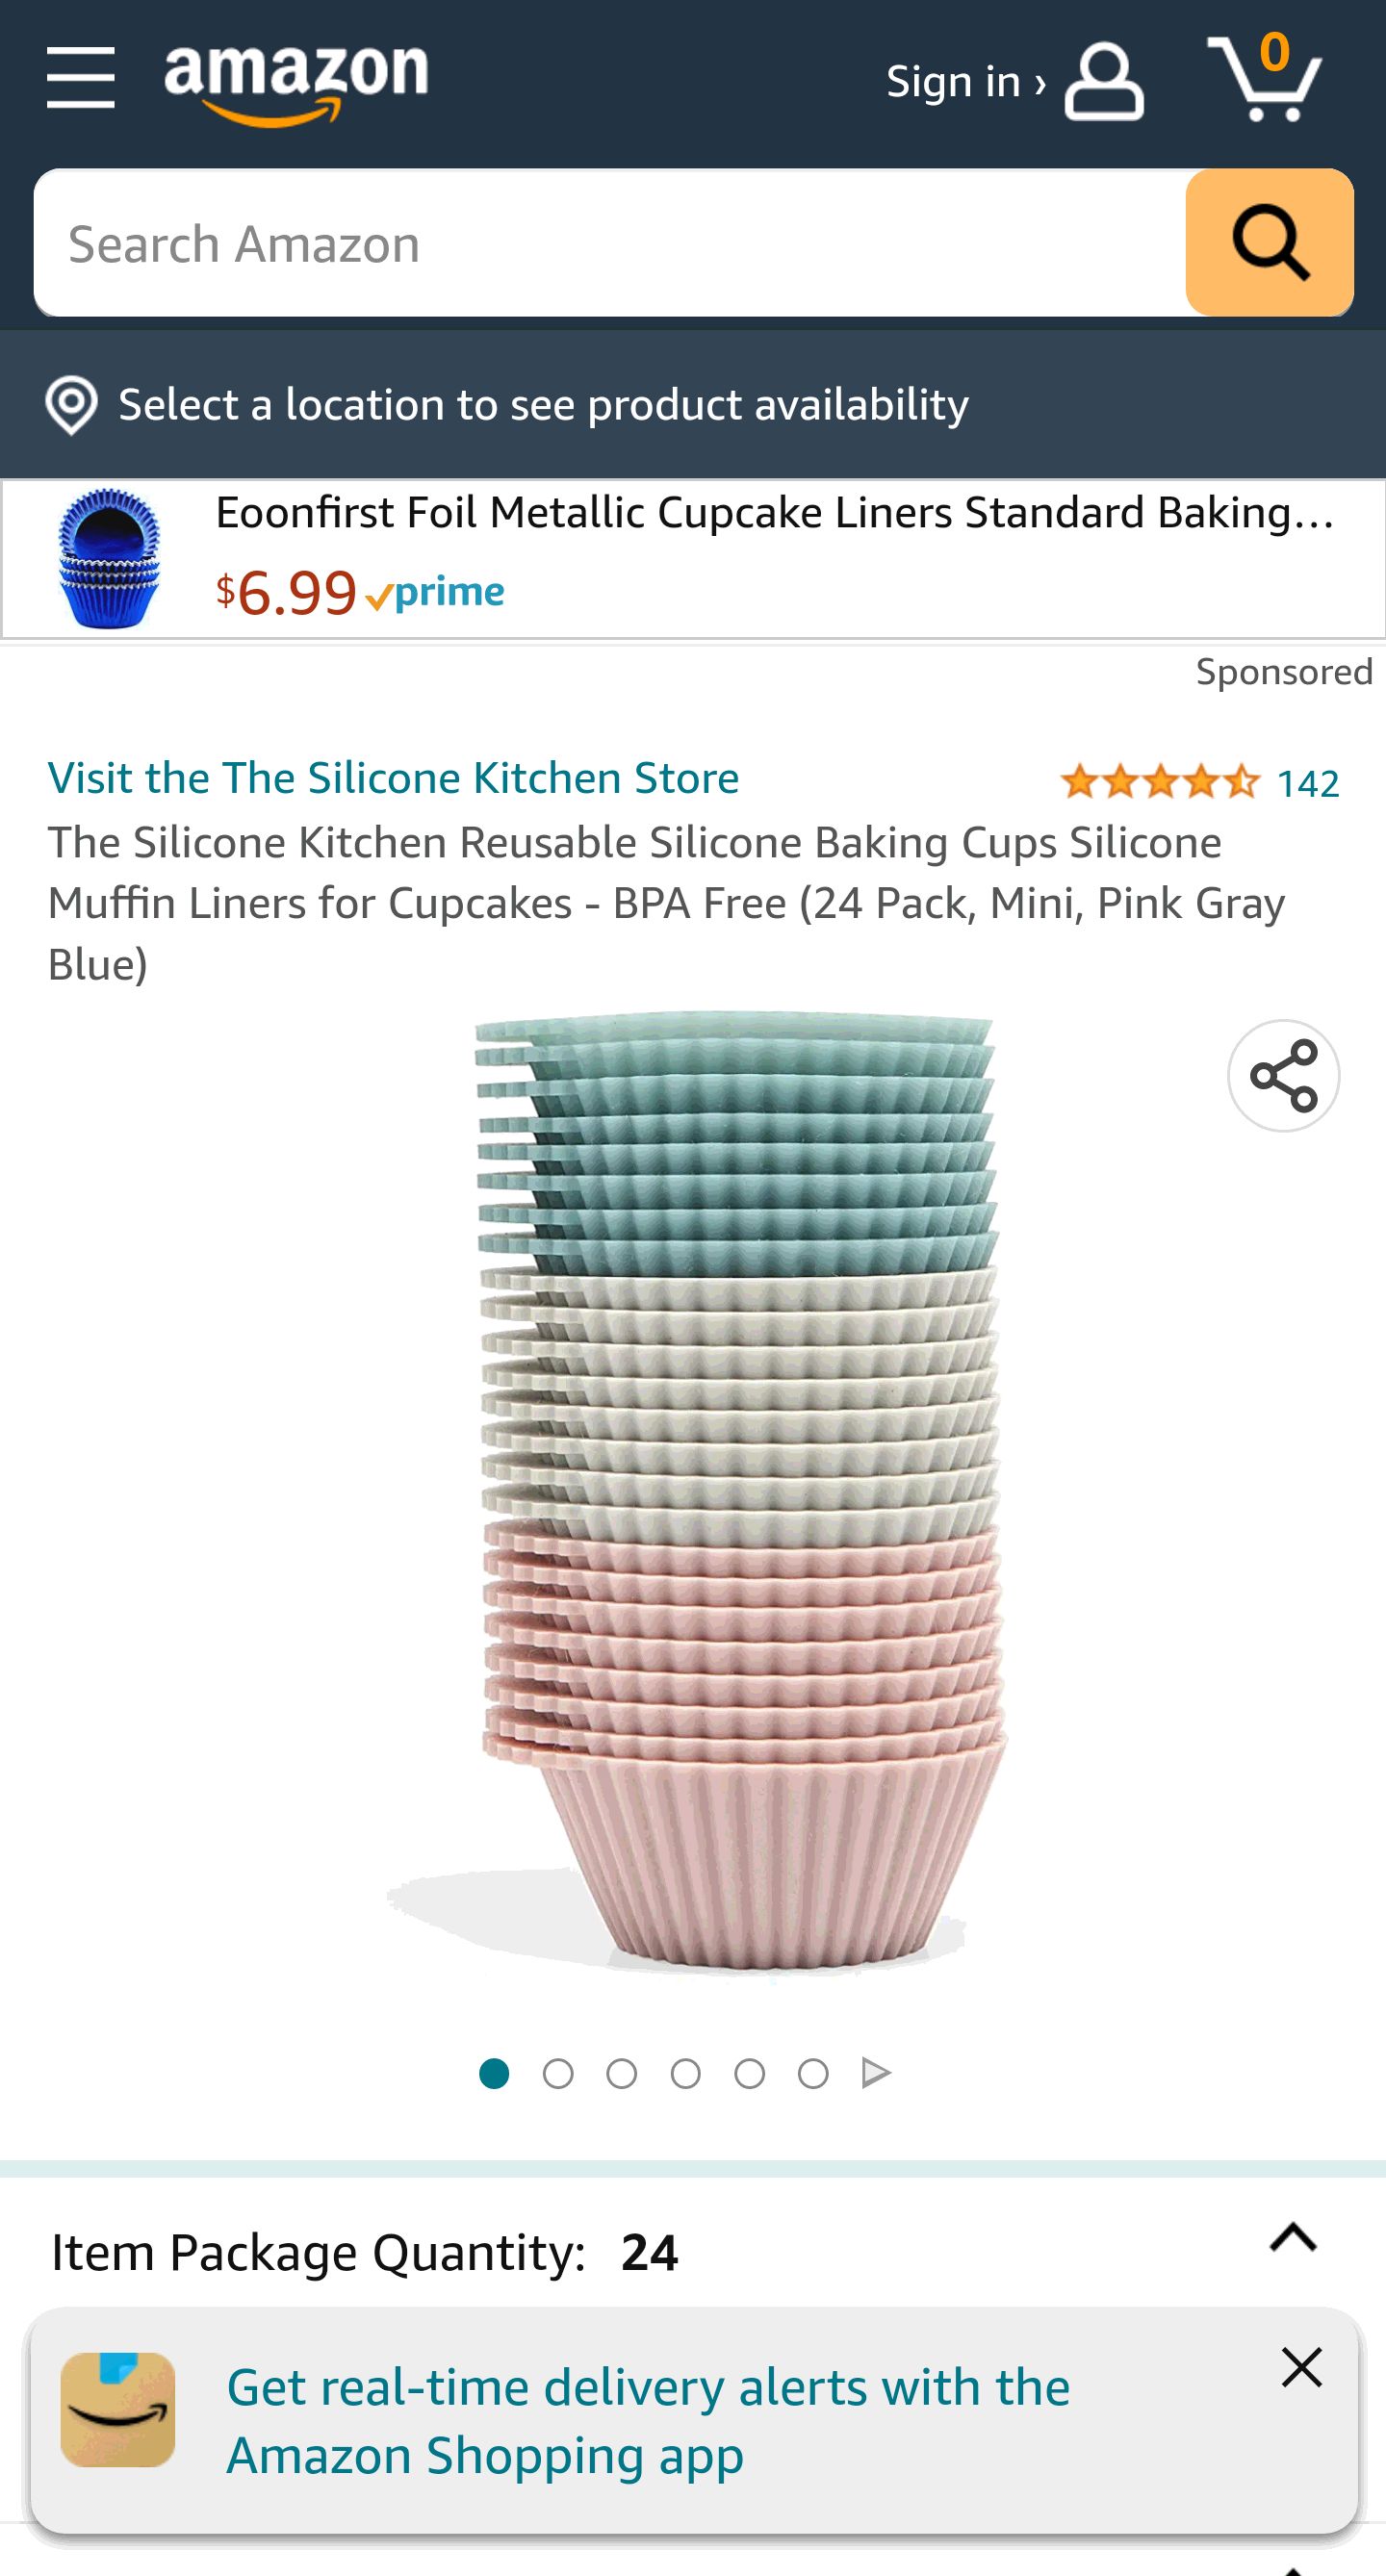 The Silicone Kitchen Reusable Silicone Baking Cups Silicone Muffin Liners for Cupcakes - BPA Free (24 Pack, Mini, Pink Gray Blue): Home & Kitchen